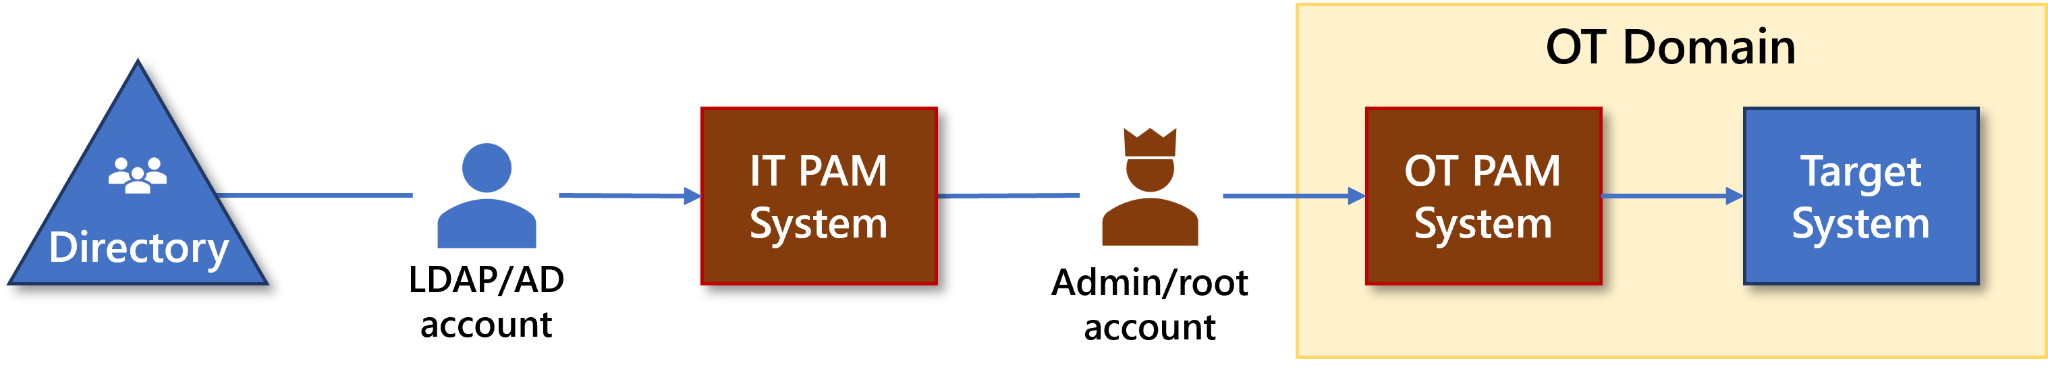 A diagram showing a PAM-to-PAM architecture in an IT/OT environment. It starts with a Directory and LDAP account, then goes through the IT PAM system to the Admin account, to the OT PAM system and finally the target system.